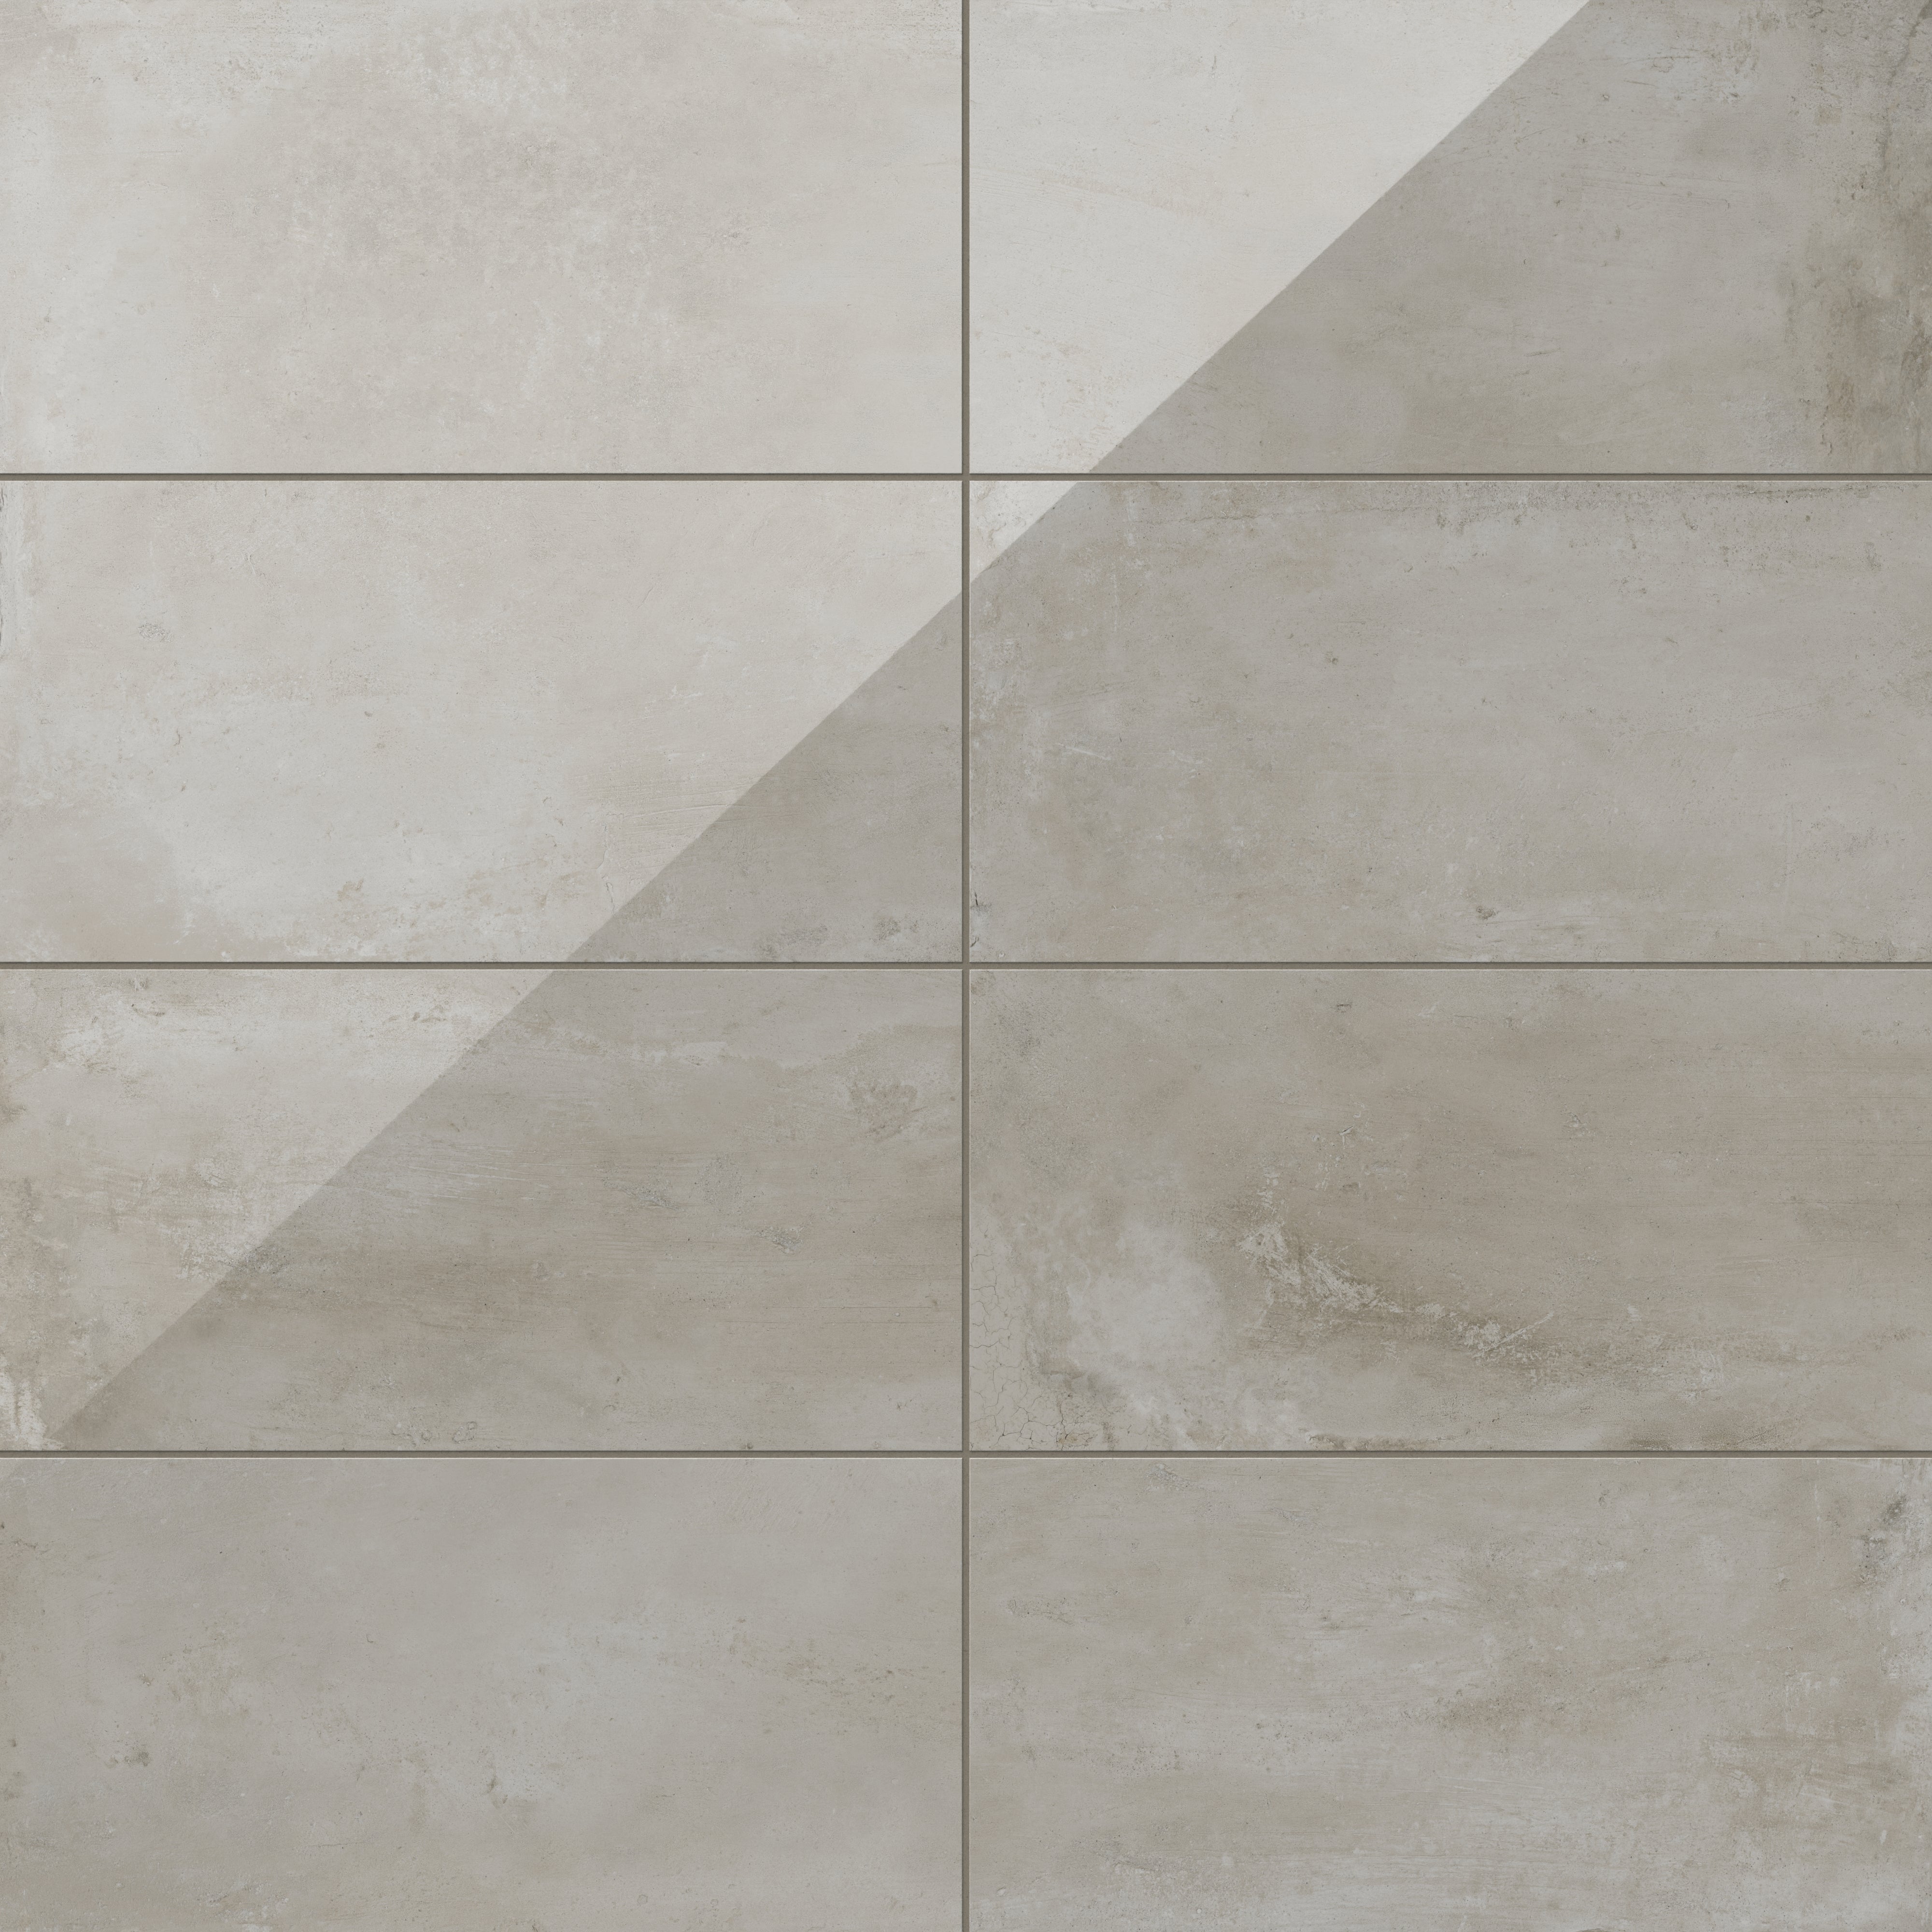 Ramsey 12x24 Polished Porcelain Tile in Putty